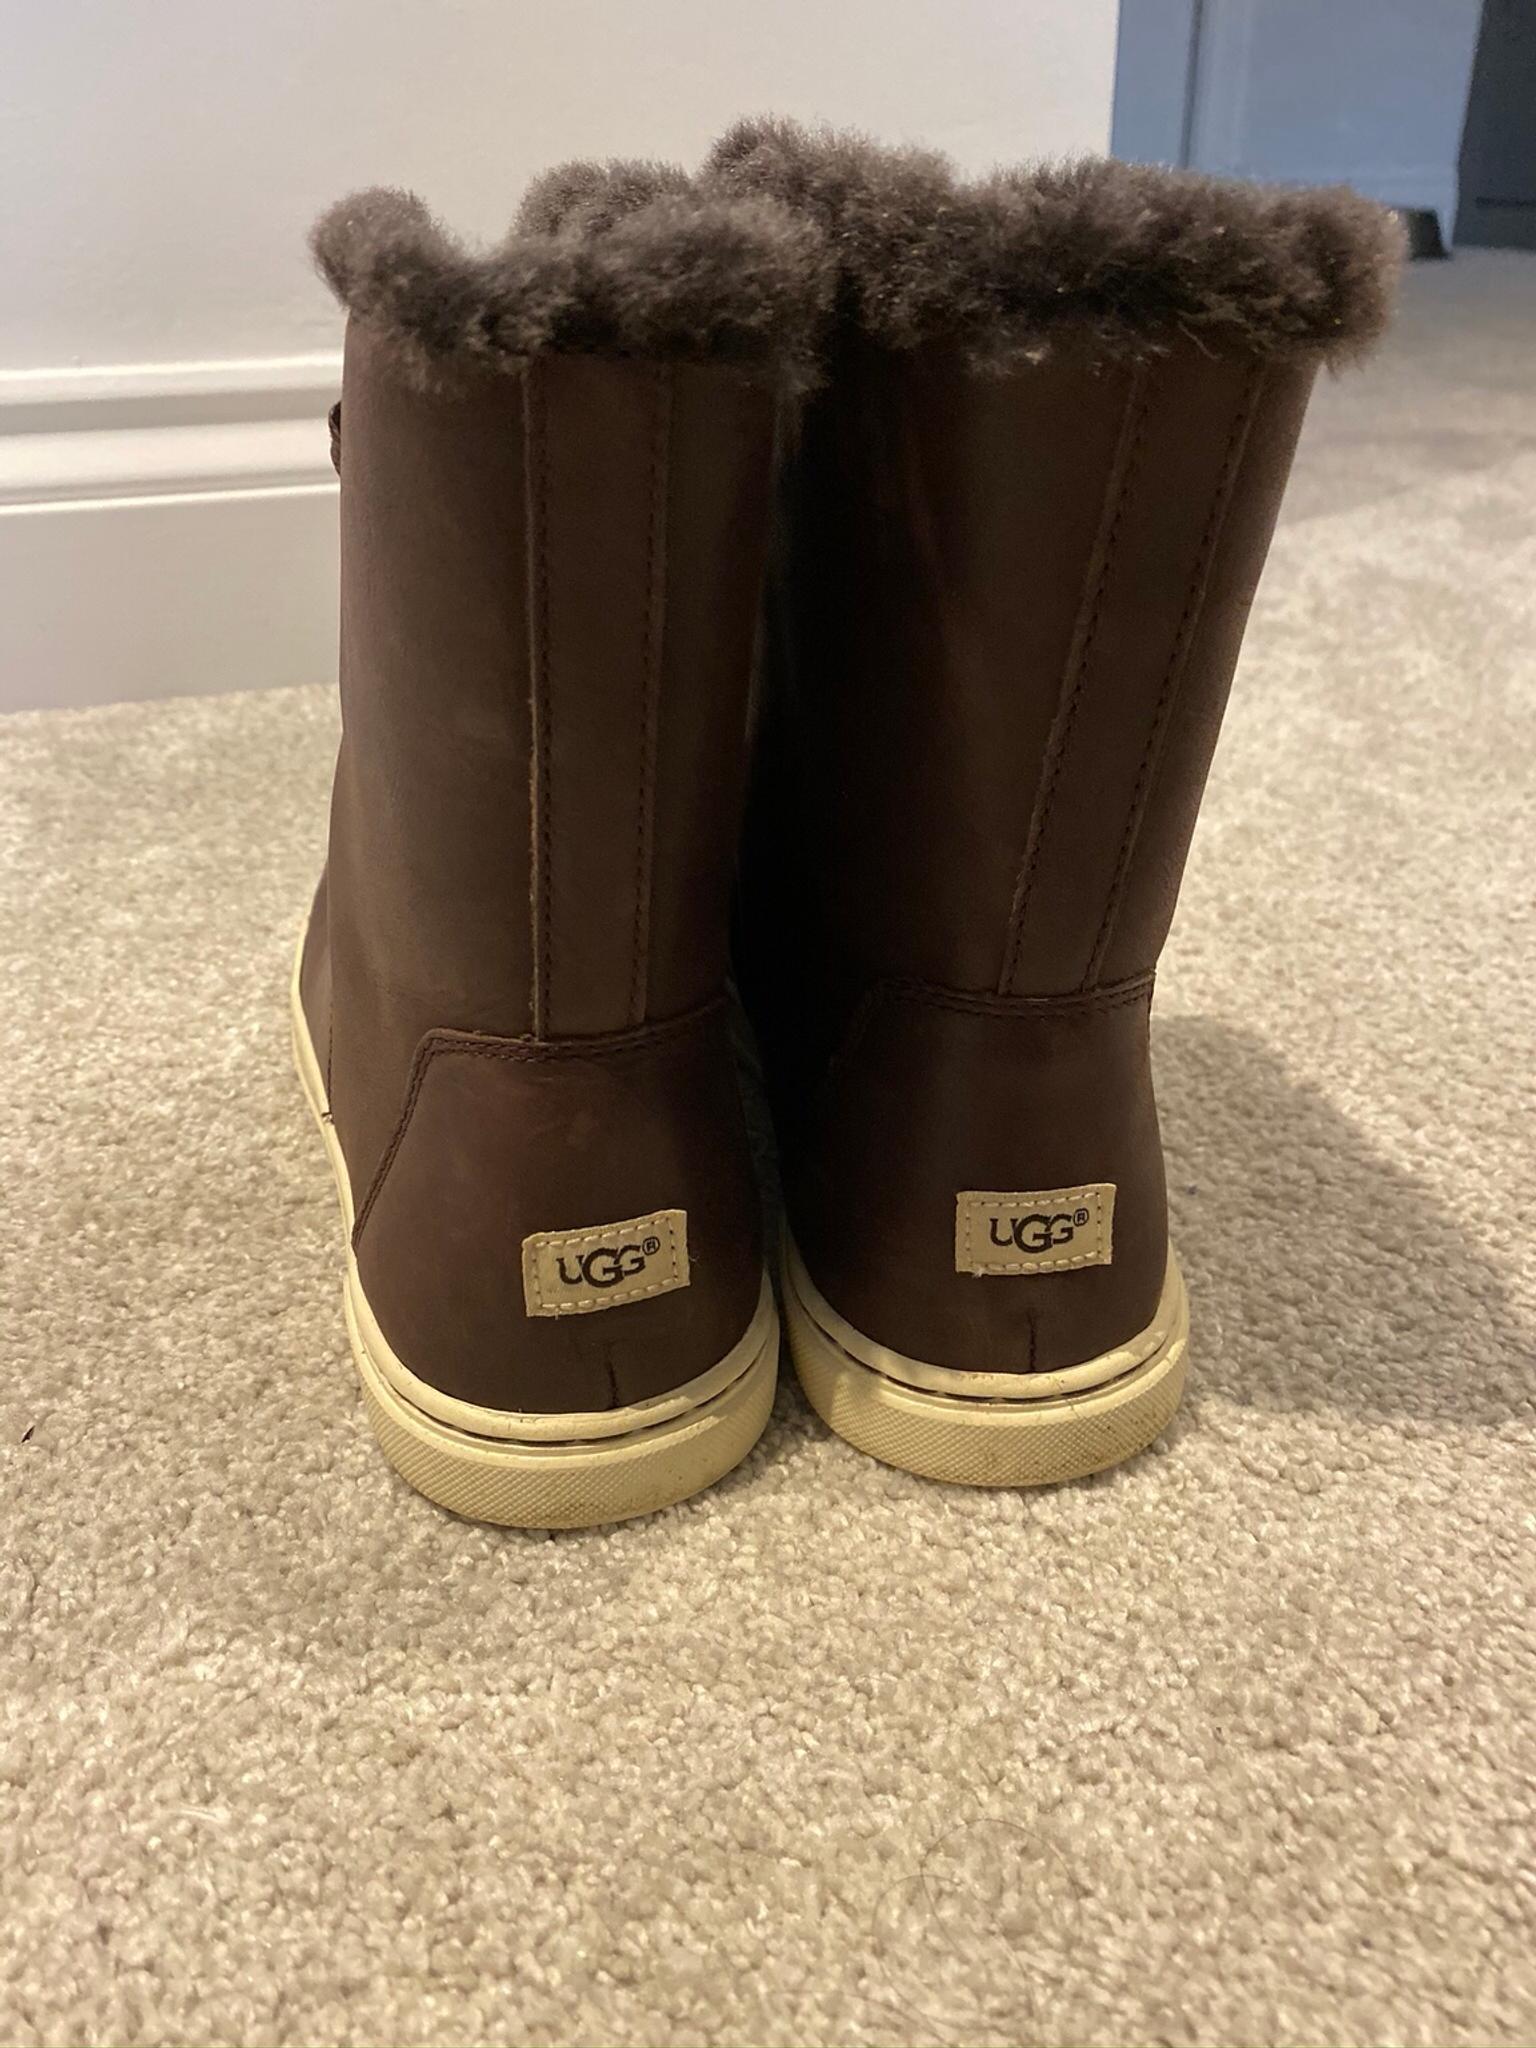 ladies ugg boots size 6.5